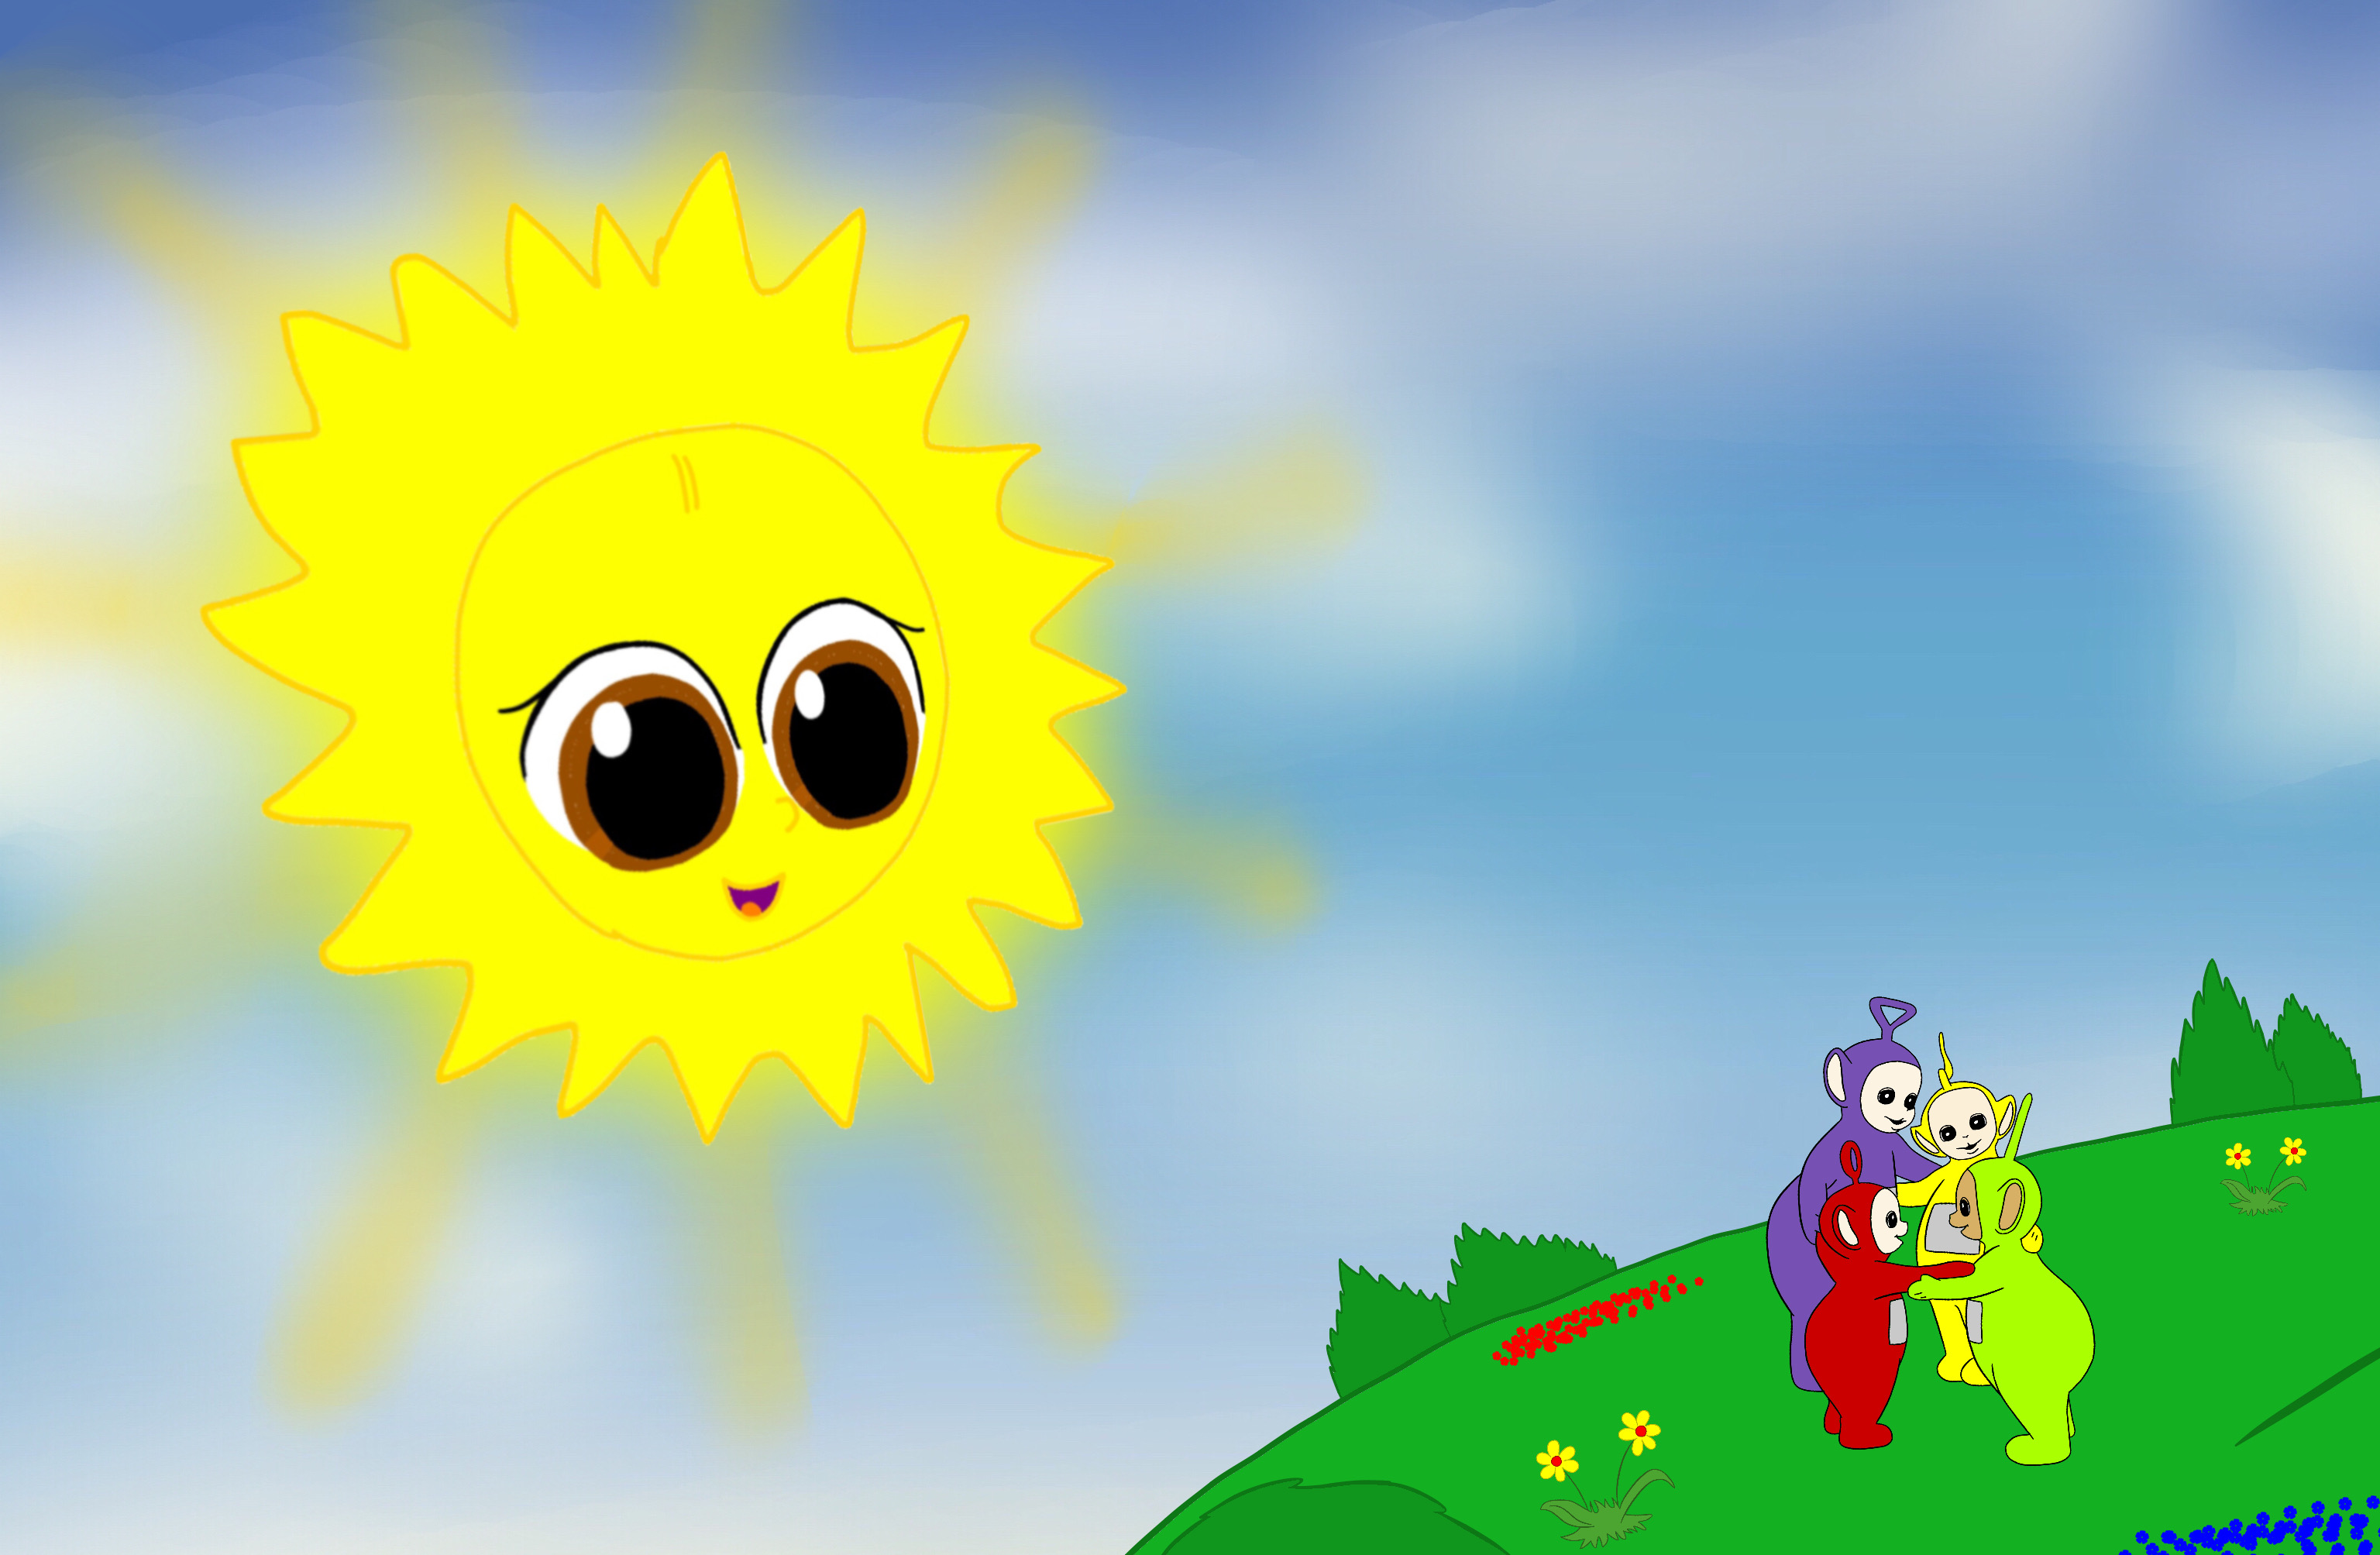 Teletubbies The Sun In The Sky By Mcdnalds16 On Deviantart